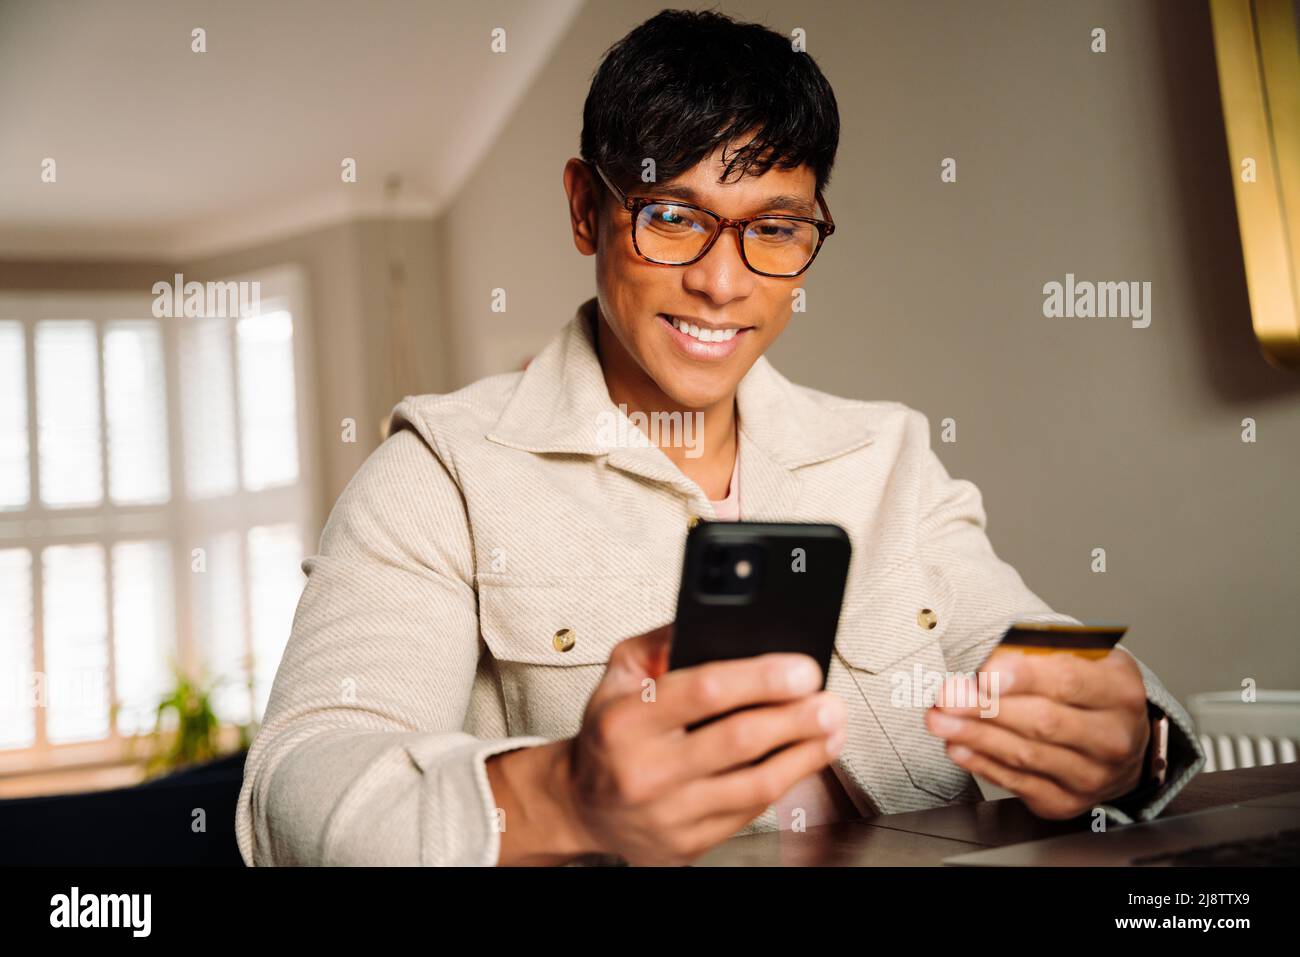 Asian male making payment on cellphone Stock Photo